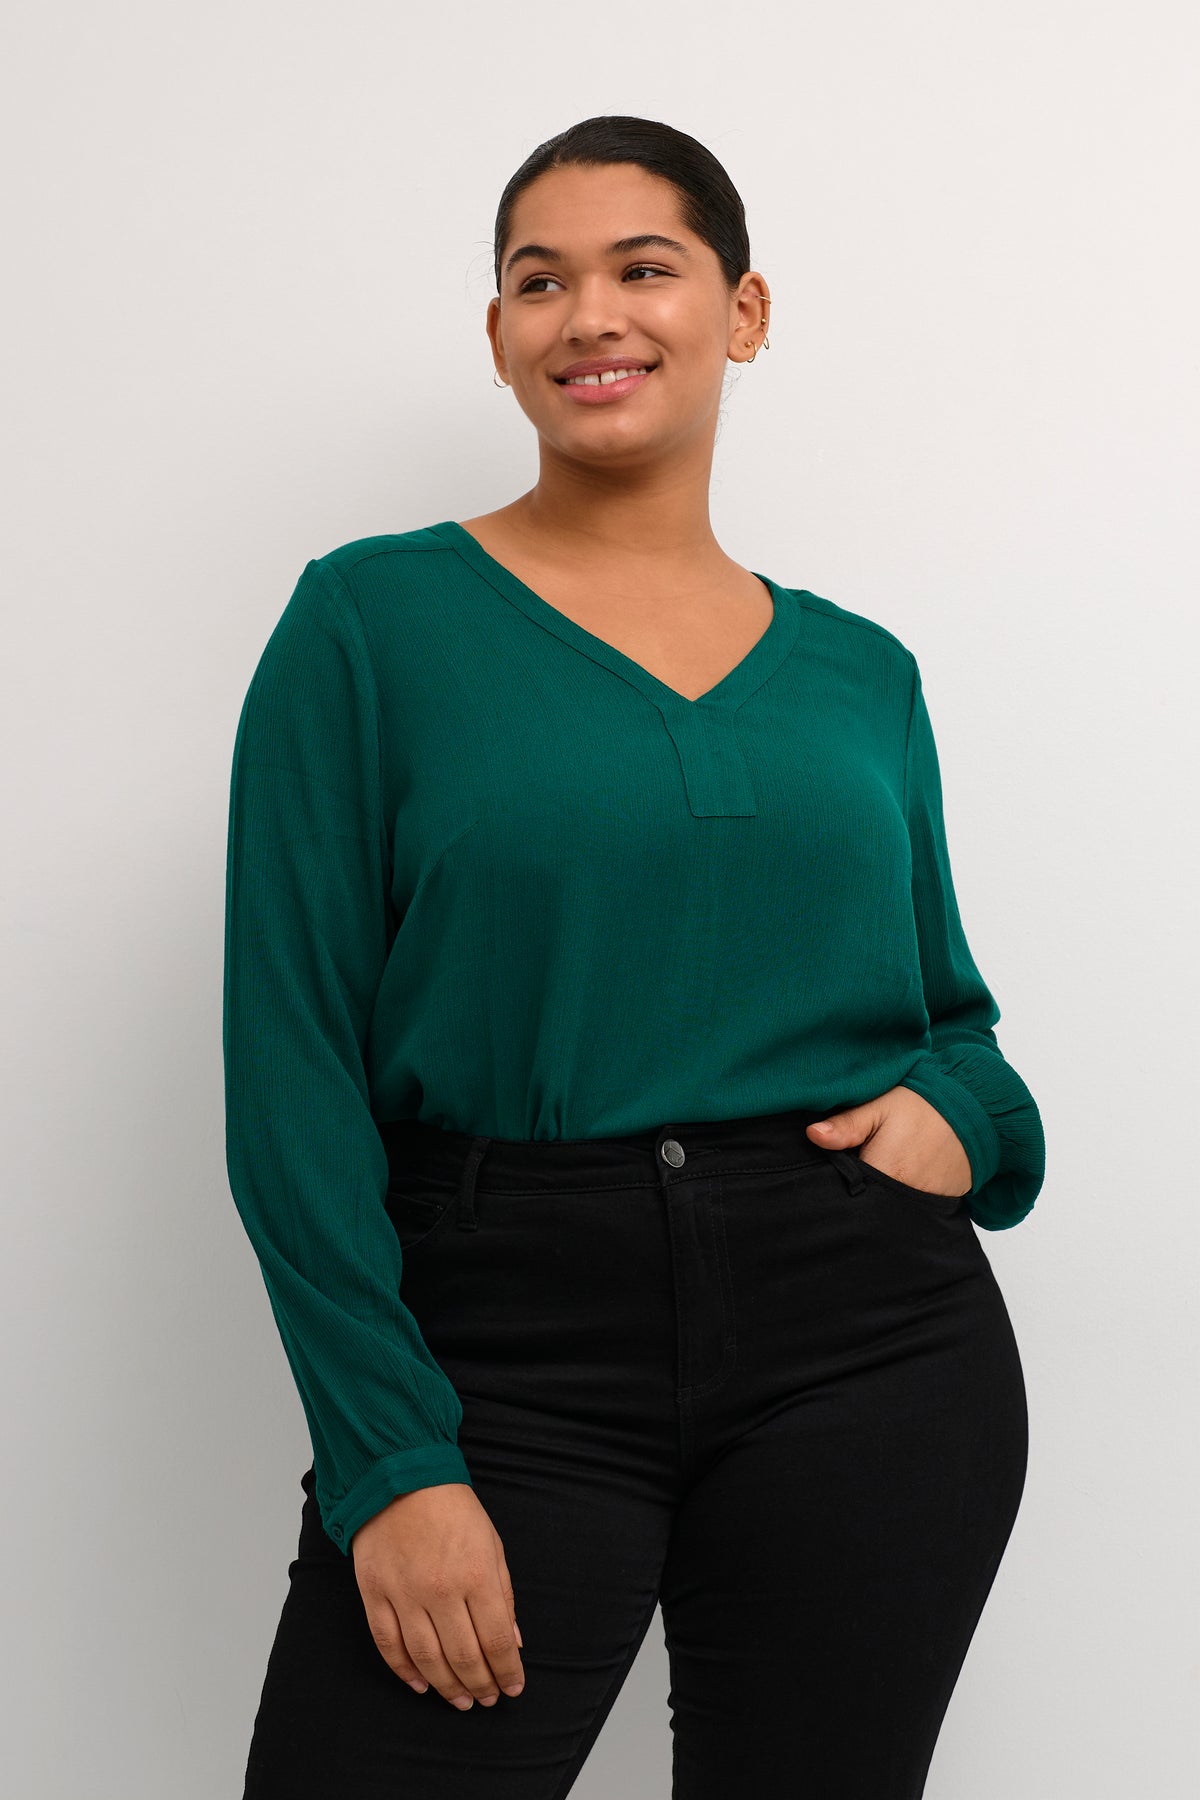 Kaffe Cami Blouse in Teal Green